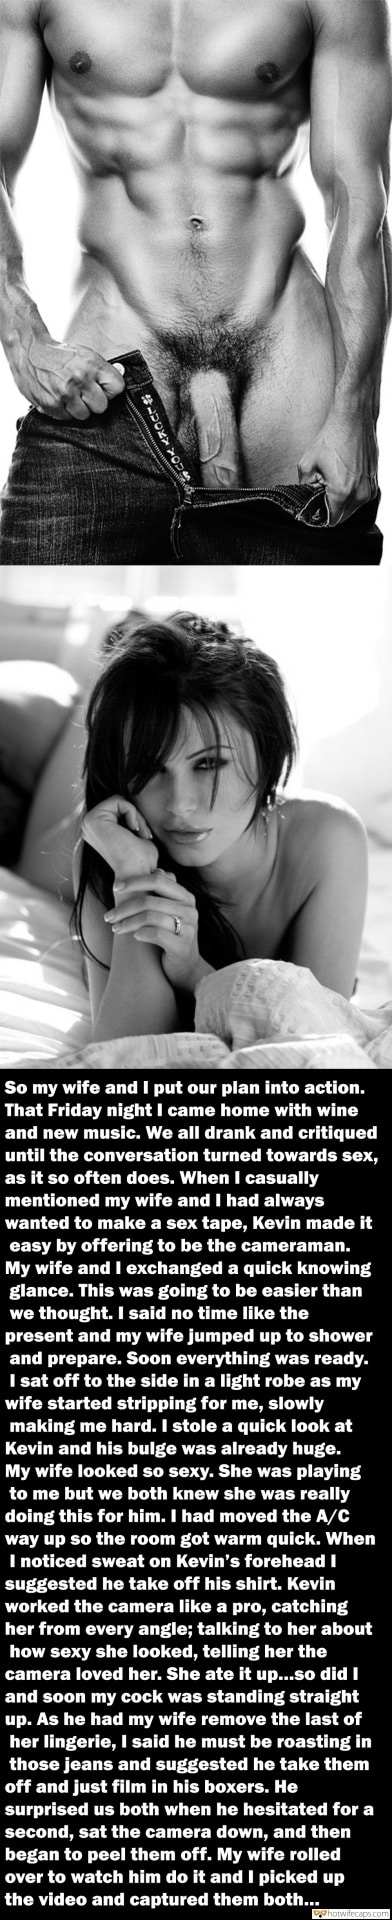 Cuckold Stories Bigger Cock hotwife caption: So my wife and I put our plan into action. That Friday night I came home with wine and new music. We all drank and critiqued until the conversation turned towards sex, as it so often does. When I casually...